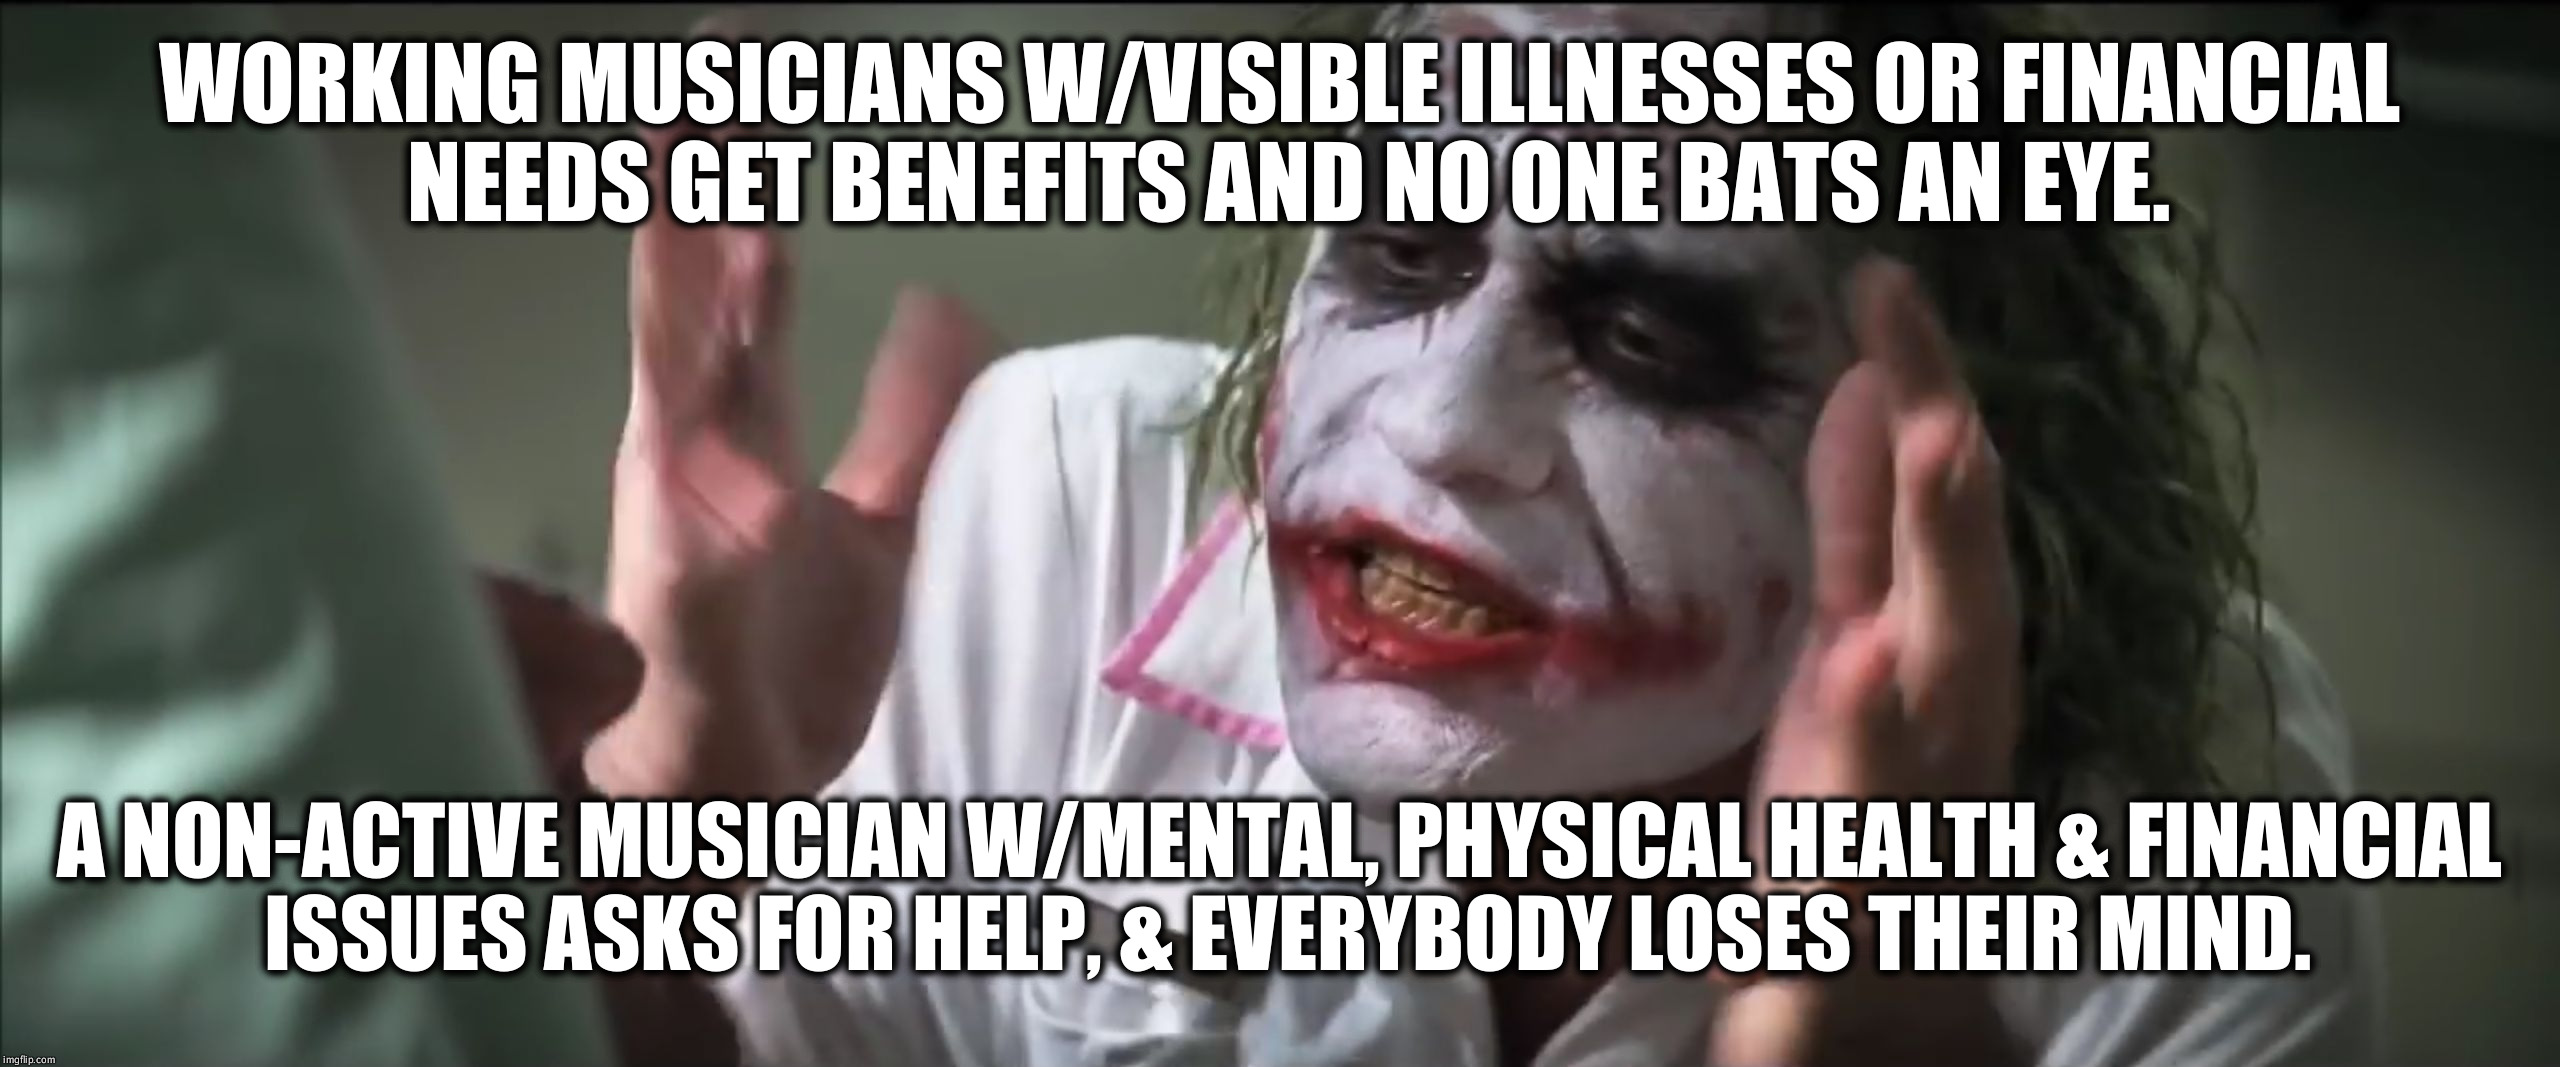 The life of a local, non-active (not by choice) musician w/Mental, Physical & Financial needs, when asking for a little help. | WORKING MUSICIANS W/VISIBLE ILLNESSES OR FINANCIAL NEEDS GET BENEFITS AND NO ONE BATS AN EYE. A NON-ACTIVE MUSICIAN W/MENTAL, PHYSICAL HEALTH & FINANCIAL ISSUES ASKS FOR HELP, & EVERYBODY LOSES THEIR MIND. | image tagged in dark knight joker harvey dent hi-rez | made w/ Imgflip meme maker